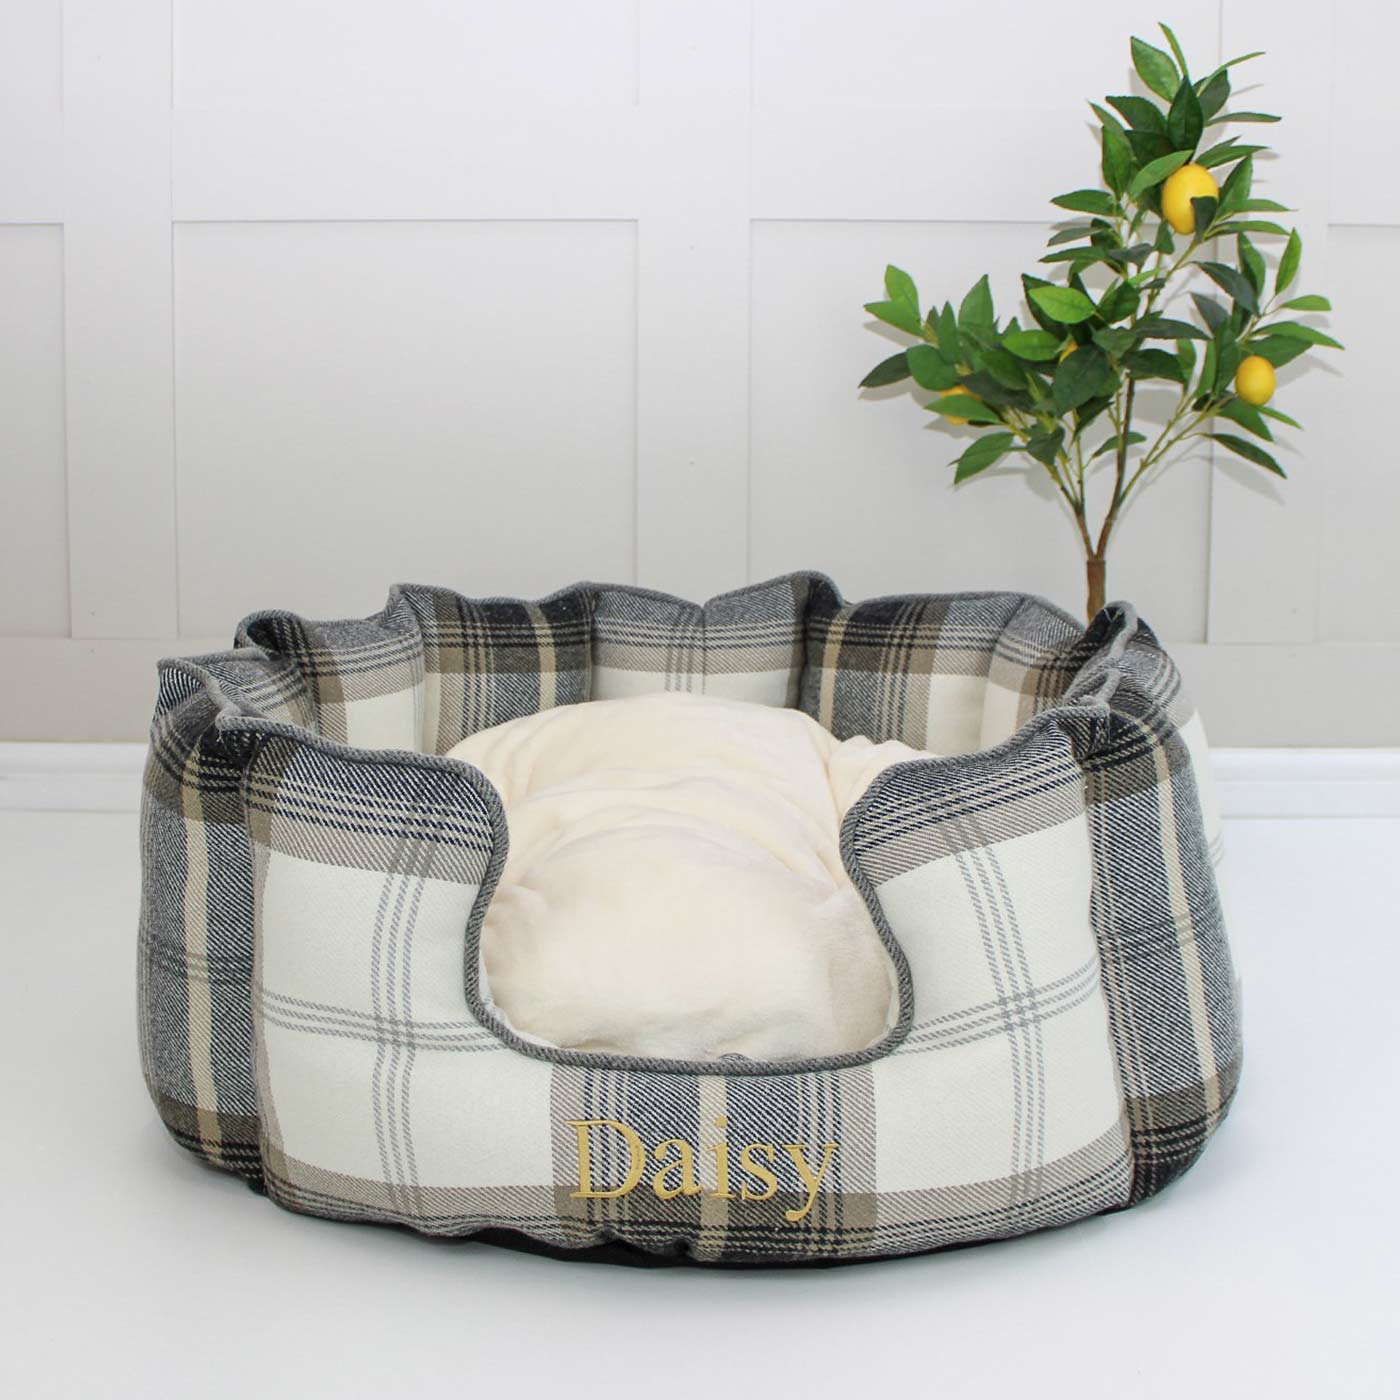 [color:charcoal tweed] Discover Our Luxurious High Wall Bed For Dogs, Featuring inner pillow with plush teddy fleece on one side To Craft The Perfect Dogs Bed In Stunning Charcoal Tweed! Available To Personalize Now at Lords & Labradors US